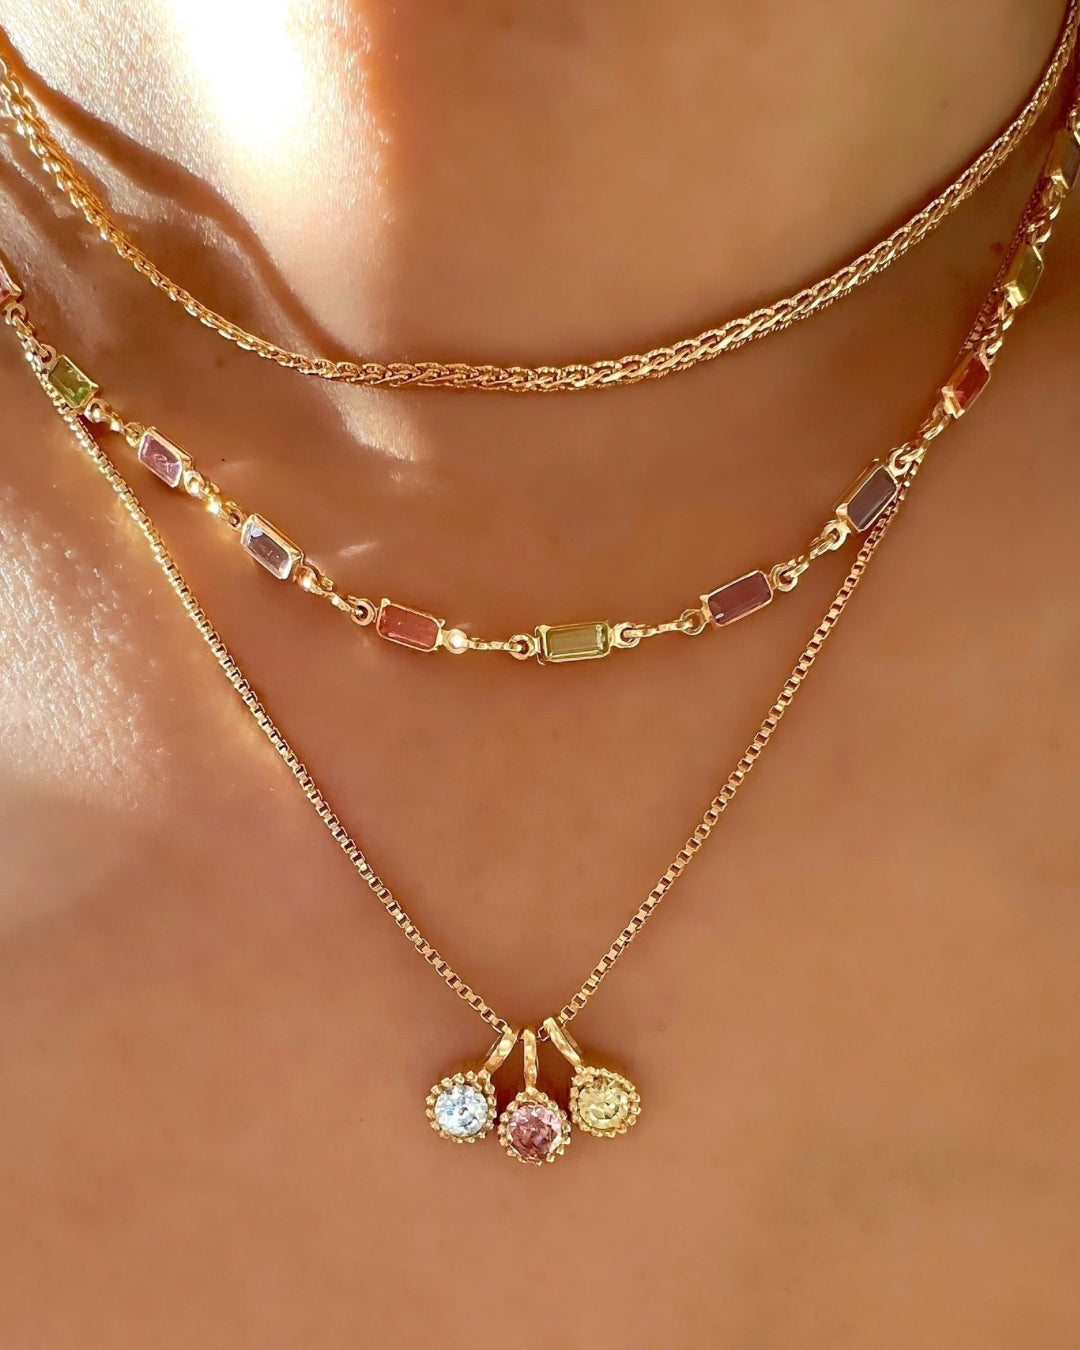 Gold Birthstone Necklace in Colours and Months, including January Garnet, February Amethyst, March Aquamarine, April Diamond, May Emerald, June Alexandrite, July Ruby, August Peridot, September Sapphire, October Tourmaline, November Citrine and December Topaz Cubic Zirconia Crystals on a model 